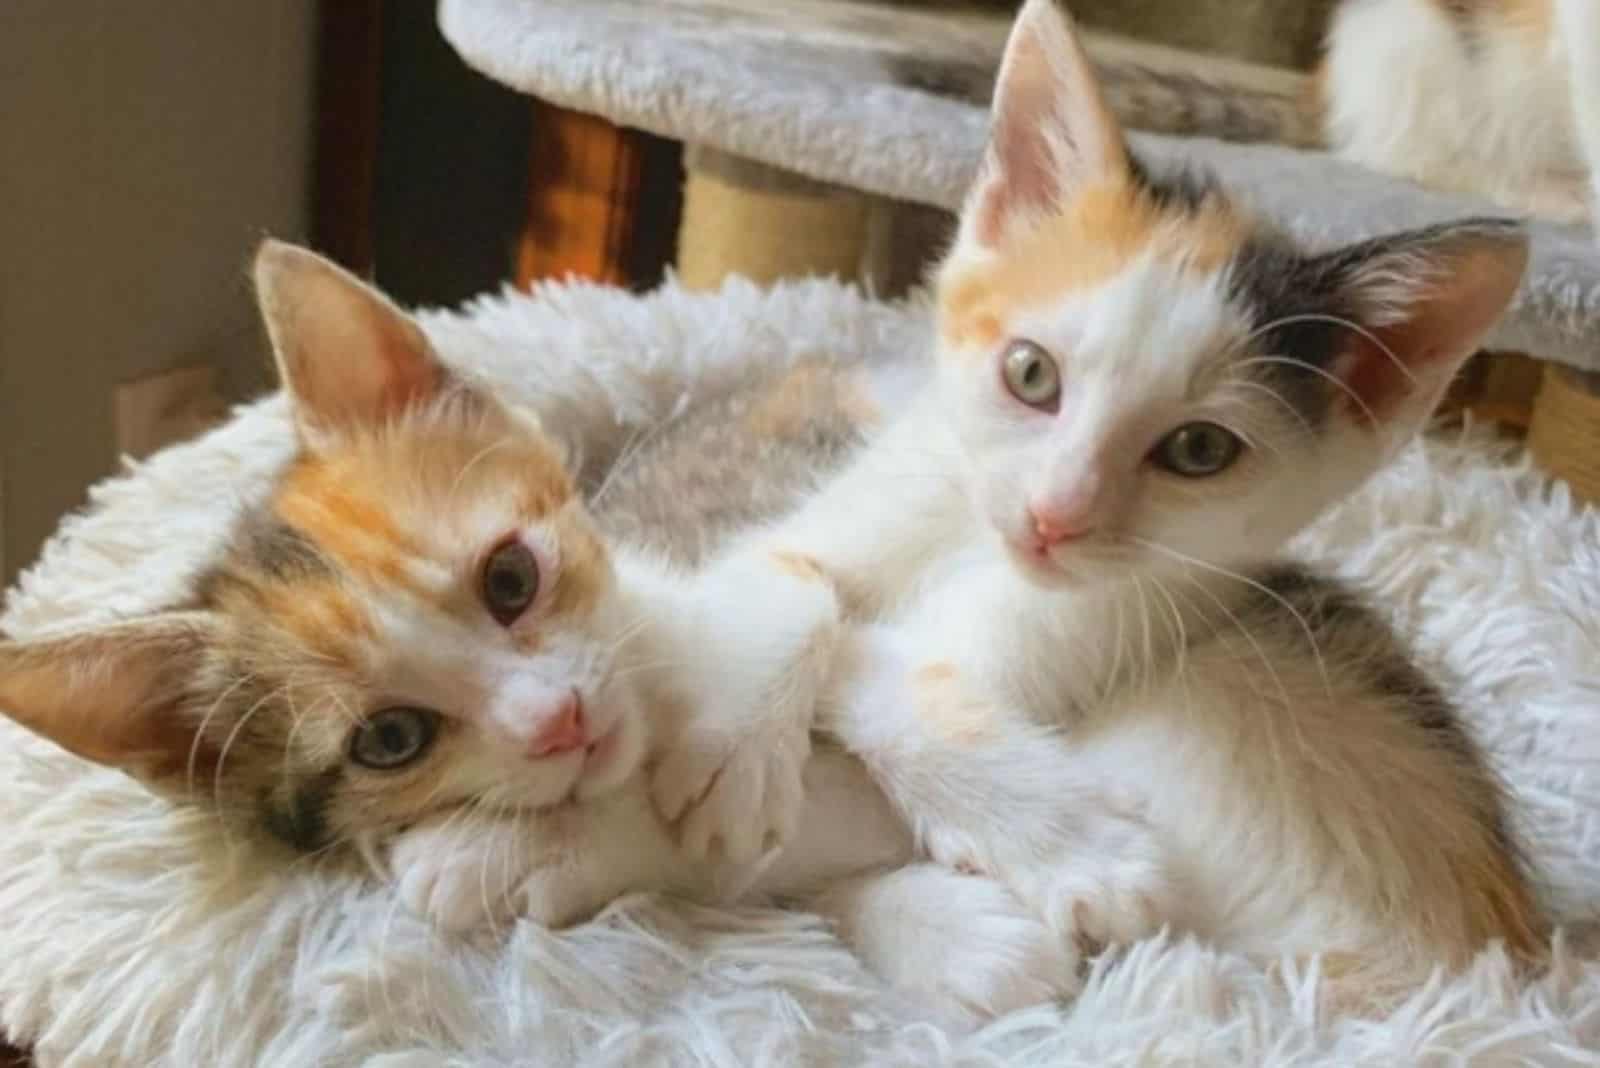 Two kittens rescued never leave each other’s side